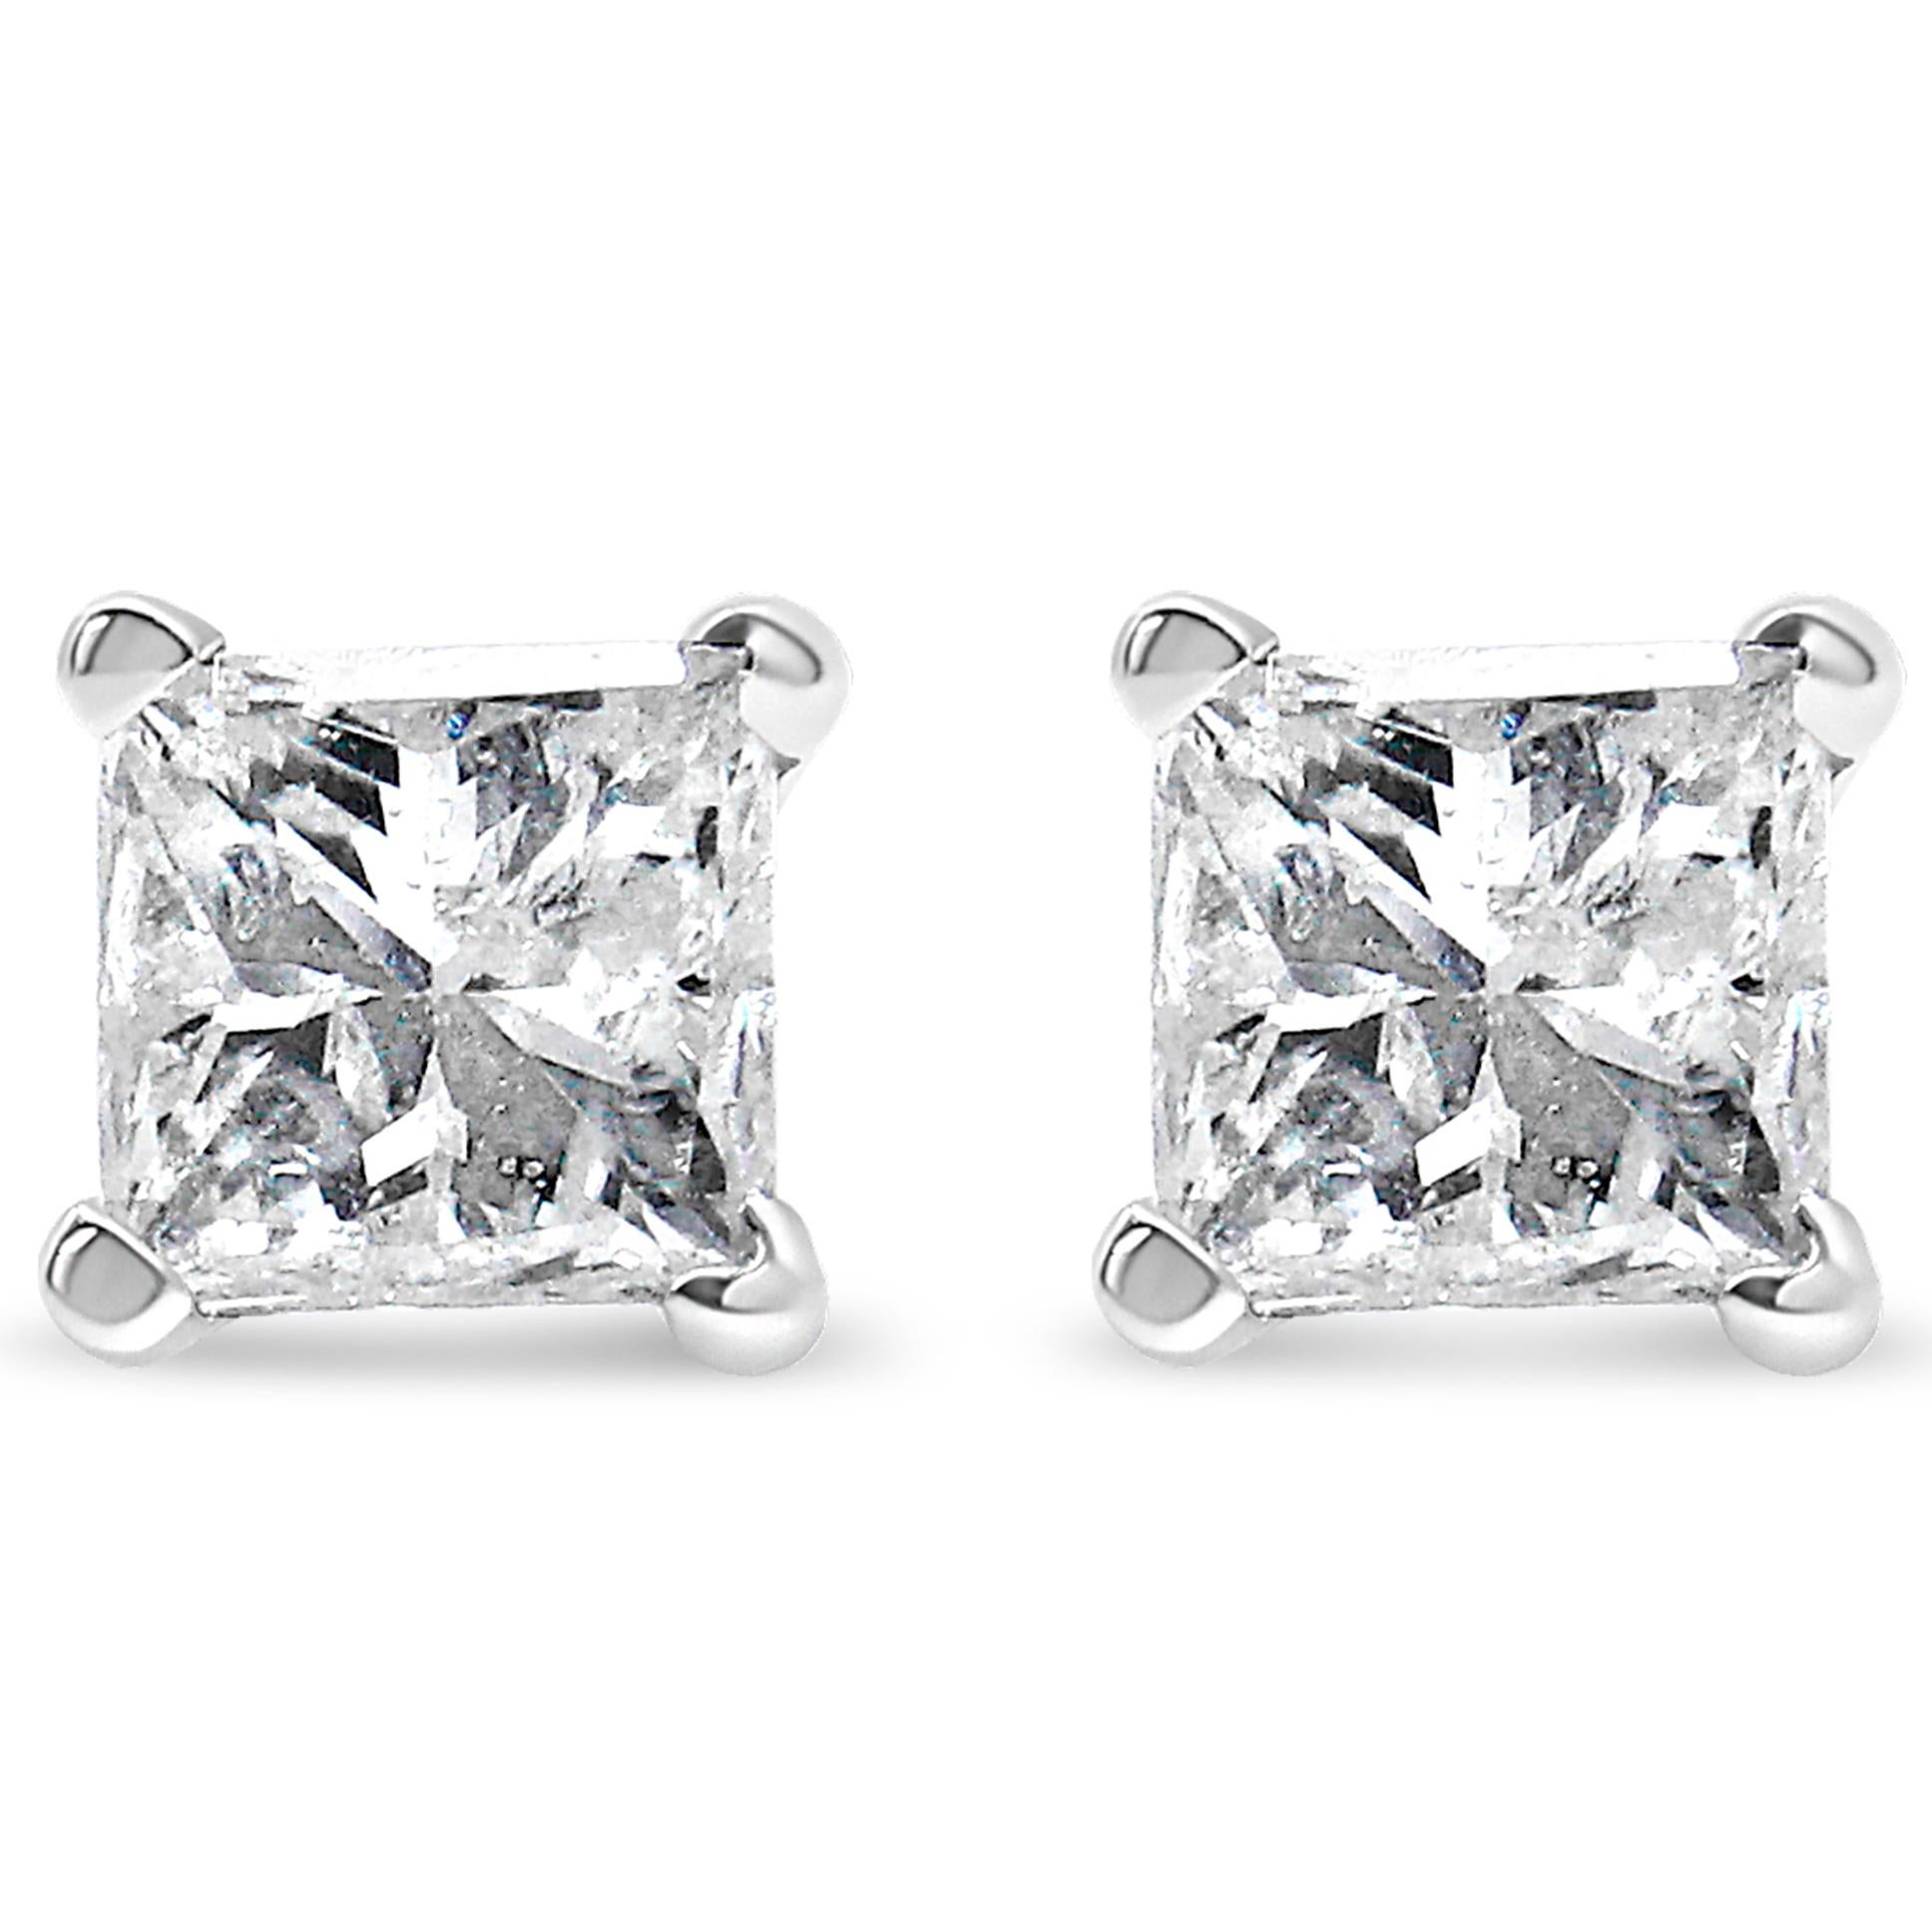 Celebrate any occasion with these classic shimmering diamond stud earrings. Fashioned in 14K white gold, each earring showcases a sparkling square shaped, brilliant cut certified diamond solitaire. Dazzling with a bright polished shine, these post